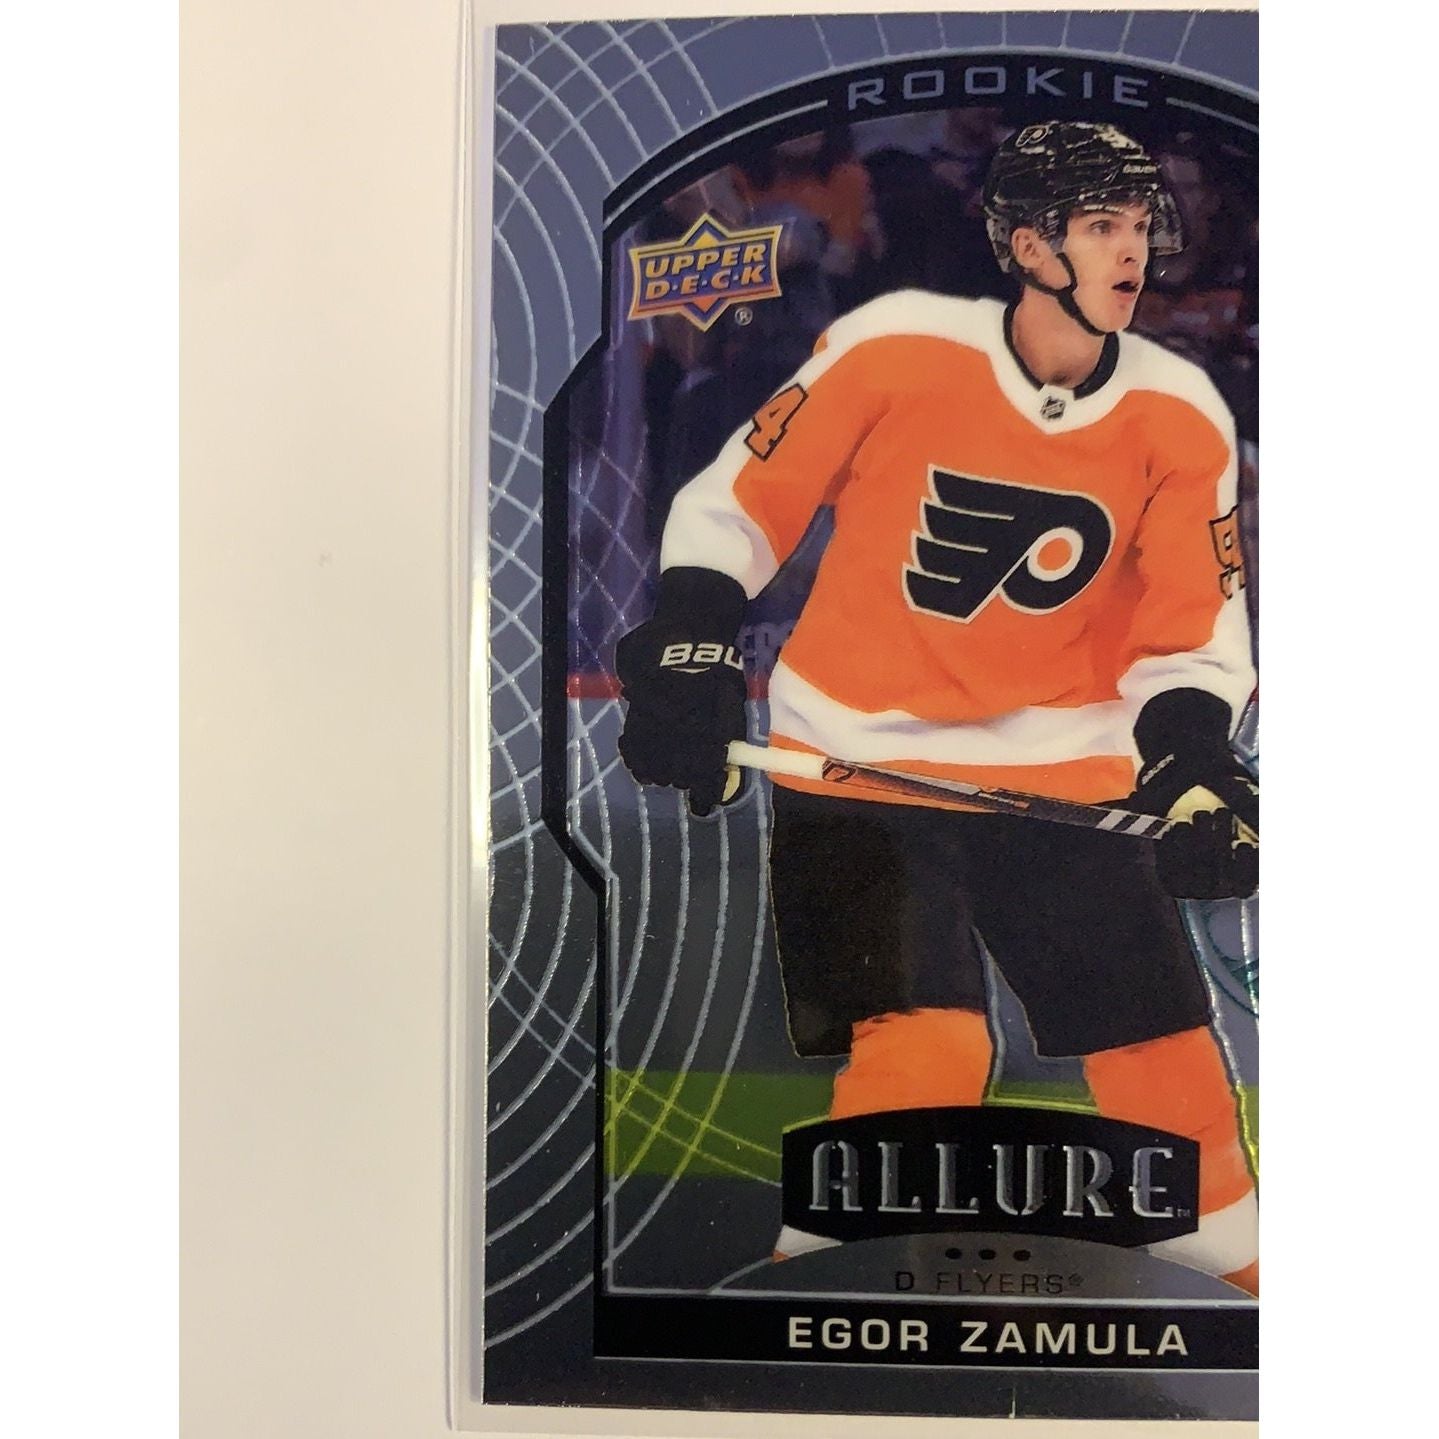  2020-21 Allure Egor Zamula Rookie Card  Local Legends Cards & Collectibles